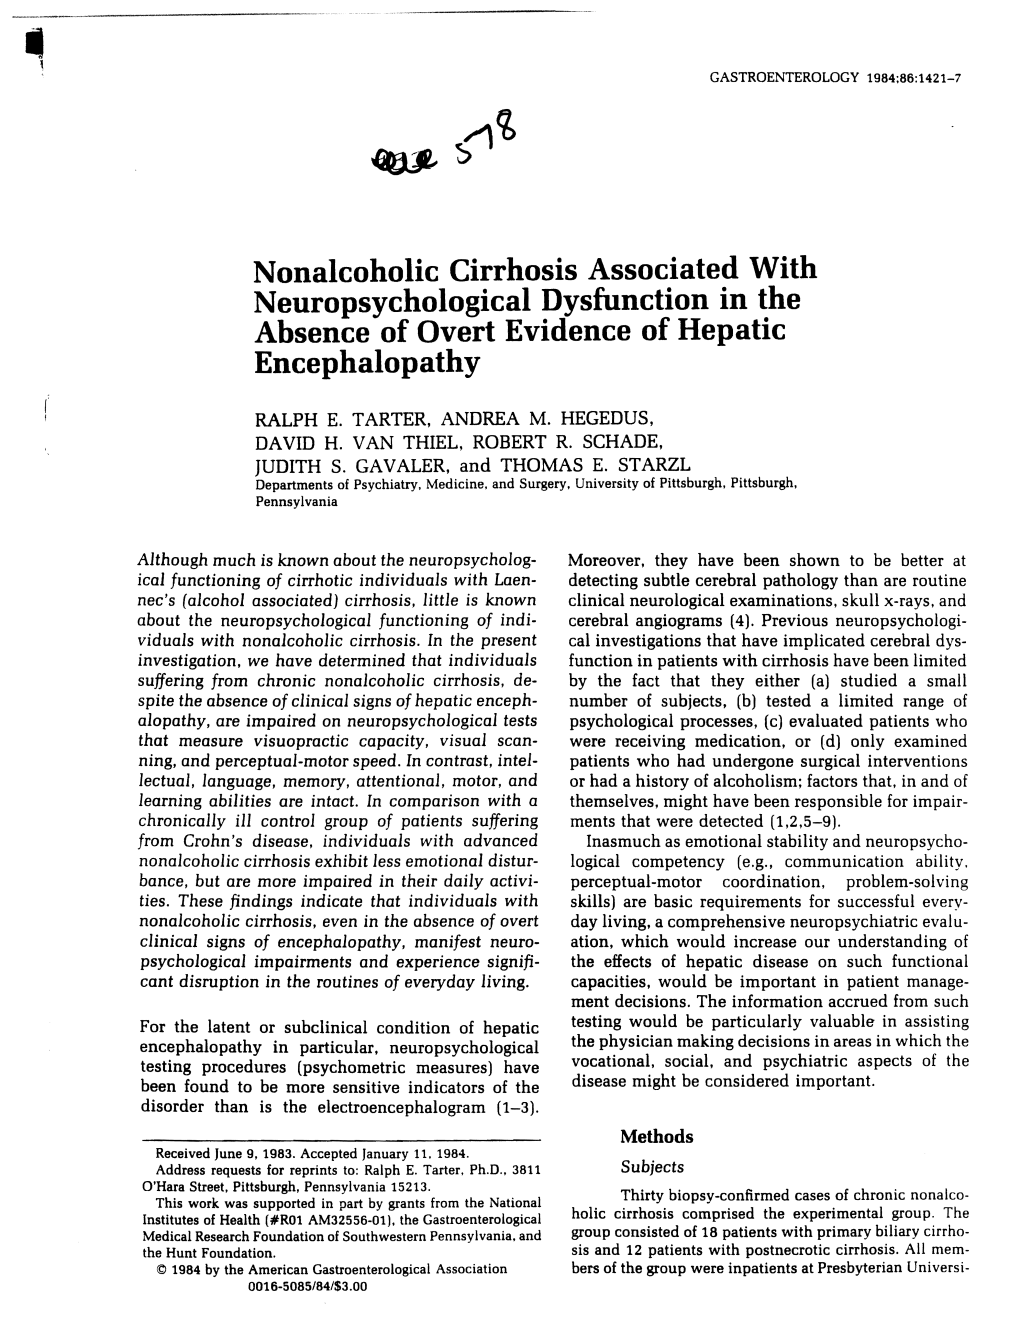 Nonalcoholic Cirrhosis Associated with Neuropsychological Dysfunction in the Absence of Overt Evidence of Hepatic Encephalopathy